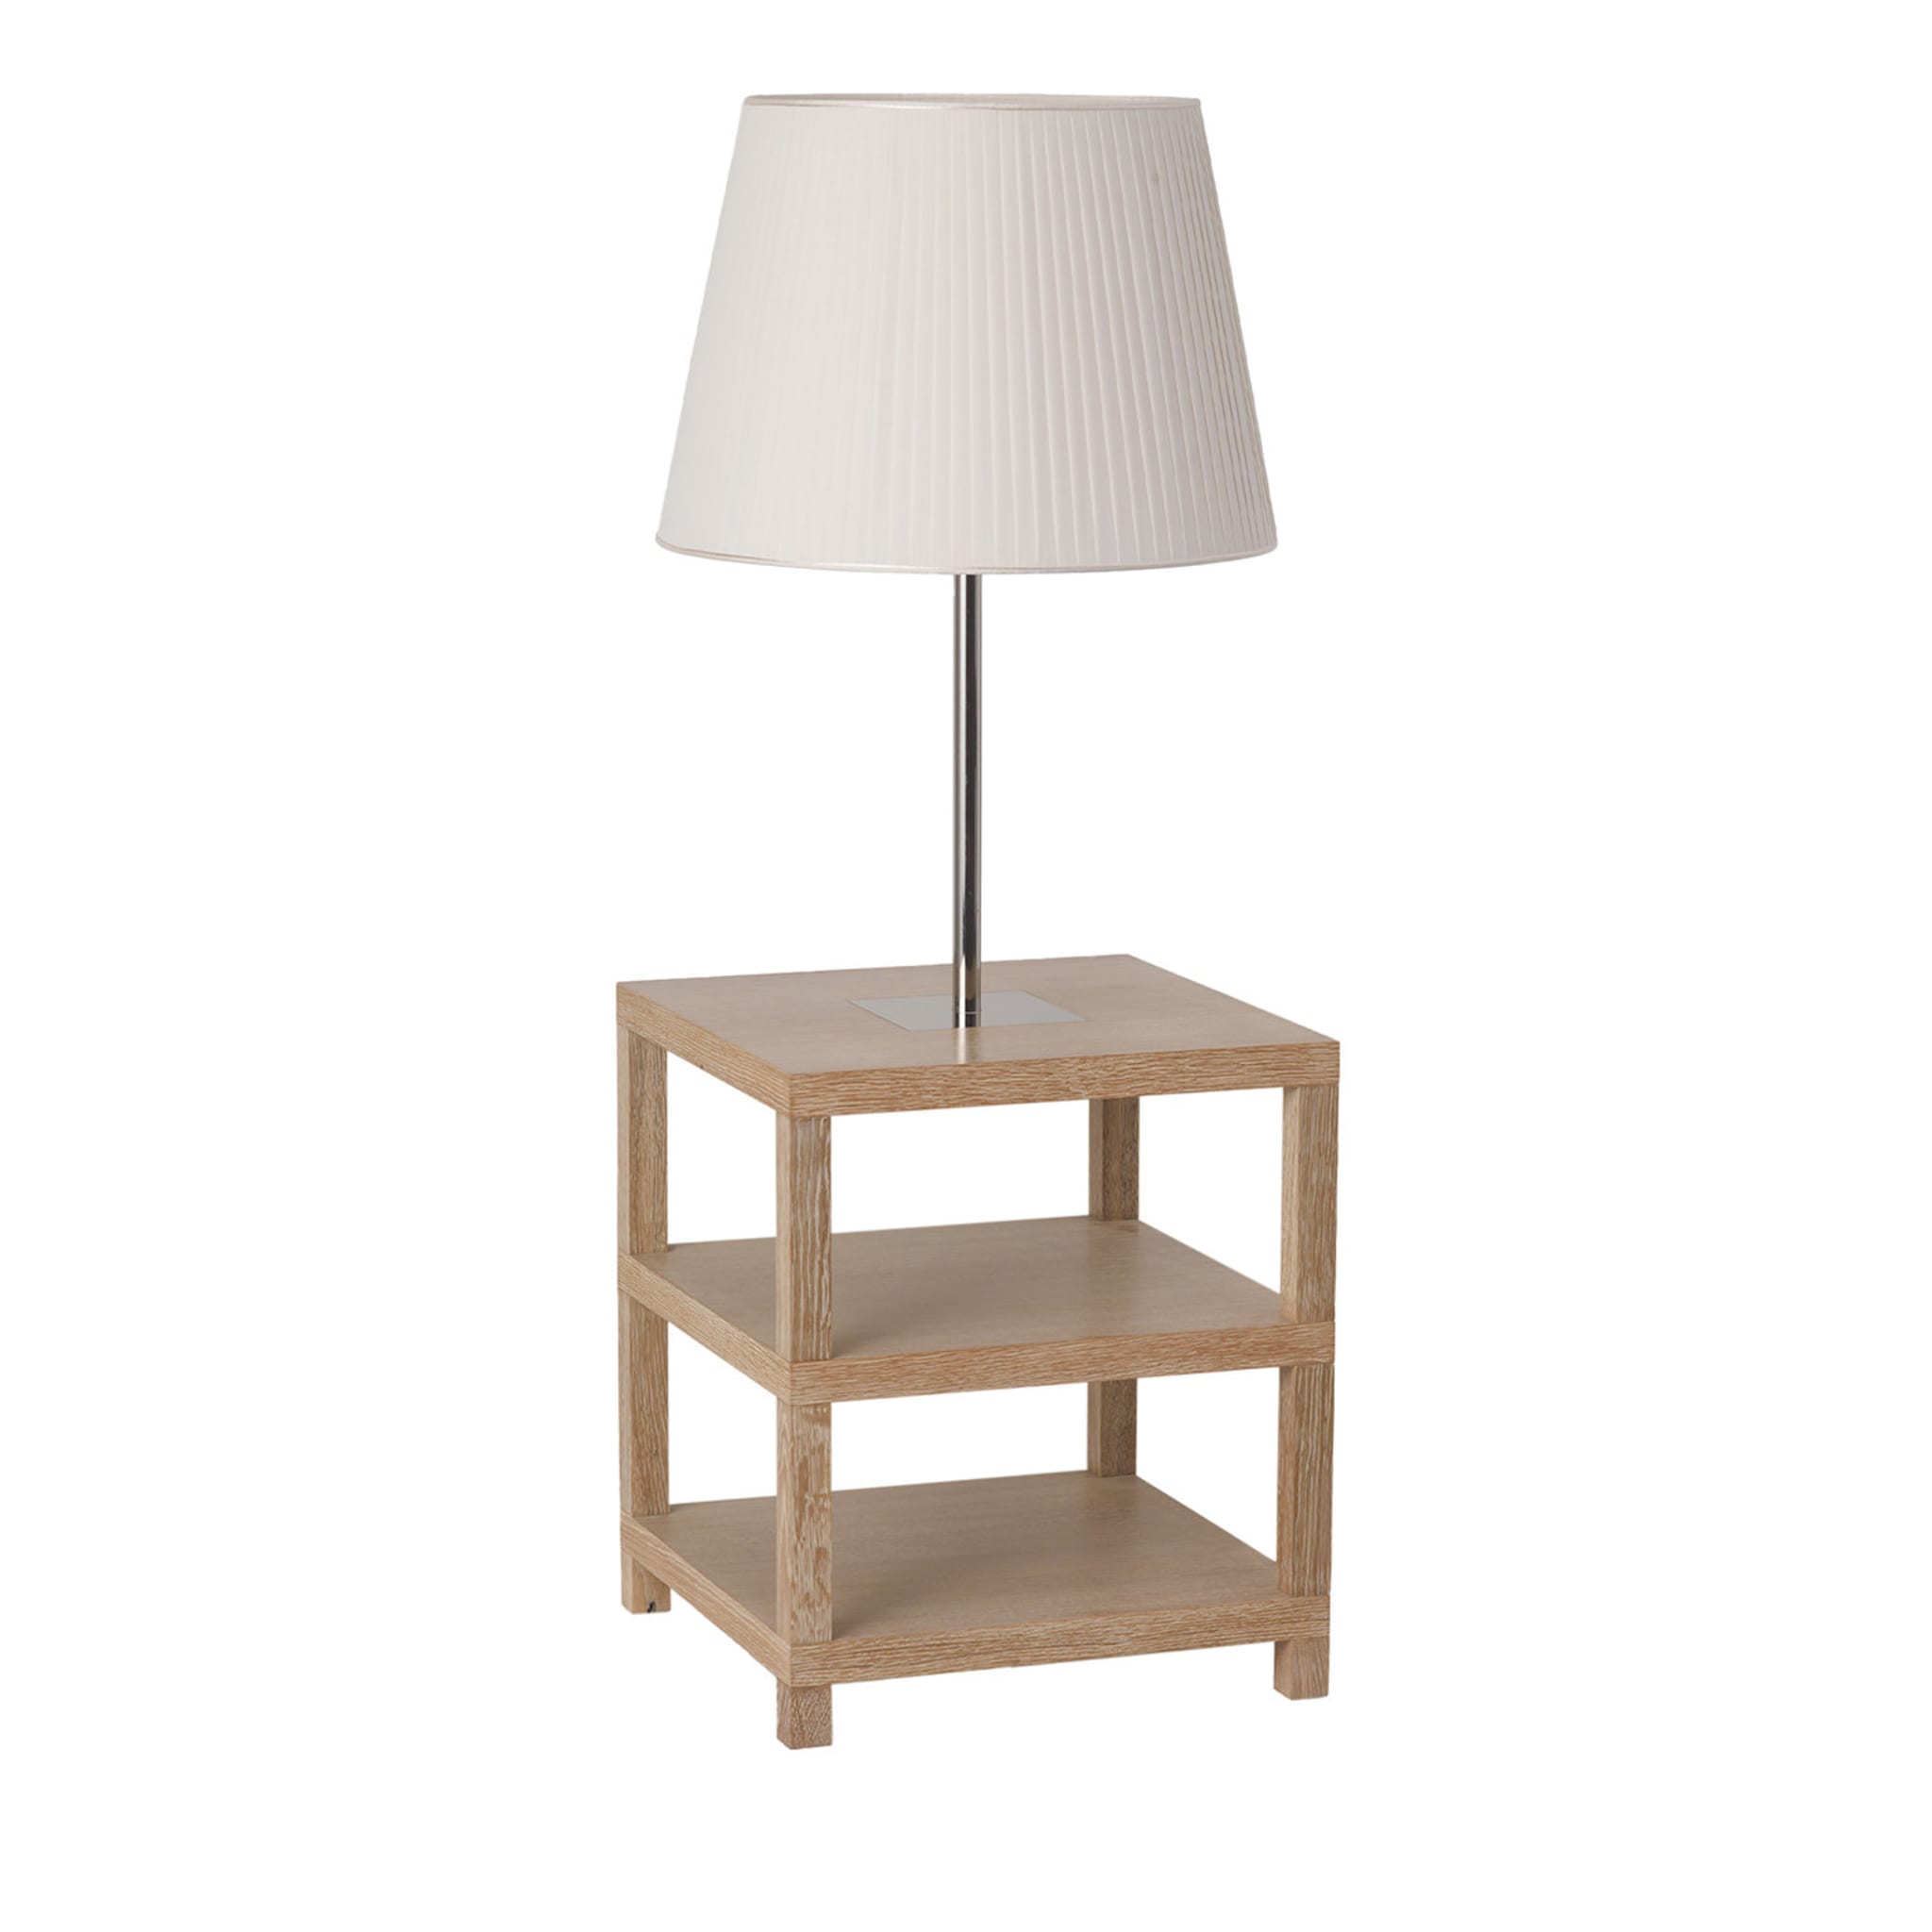 Bedside Table with Lamp by Michele Bonan - Main view